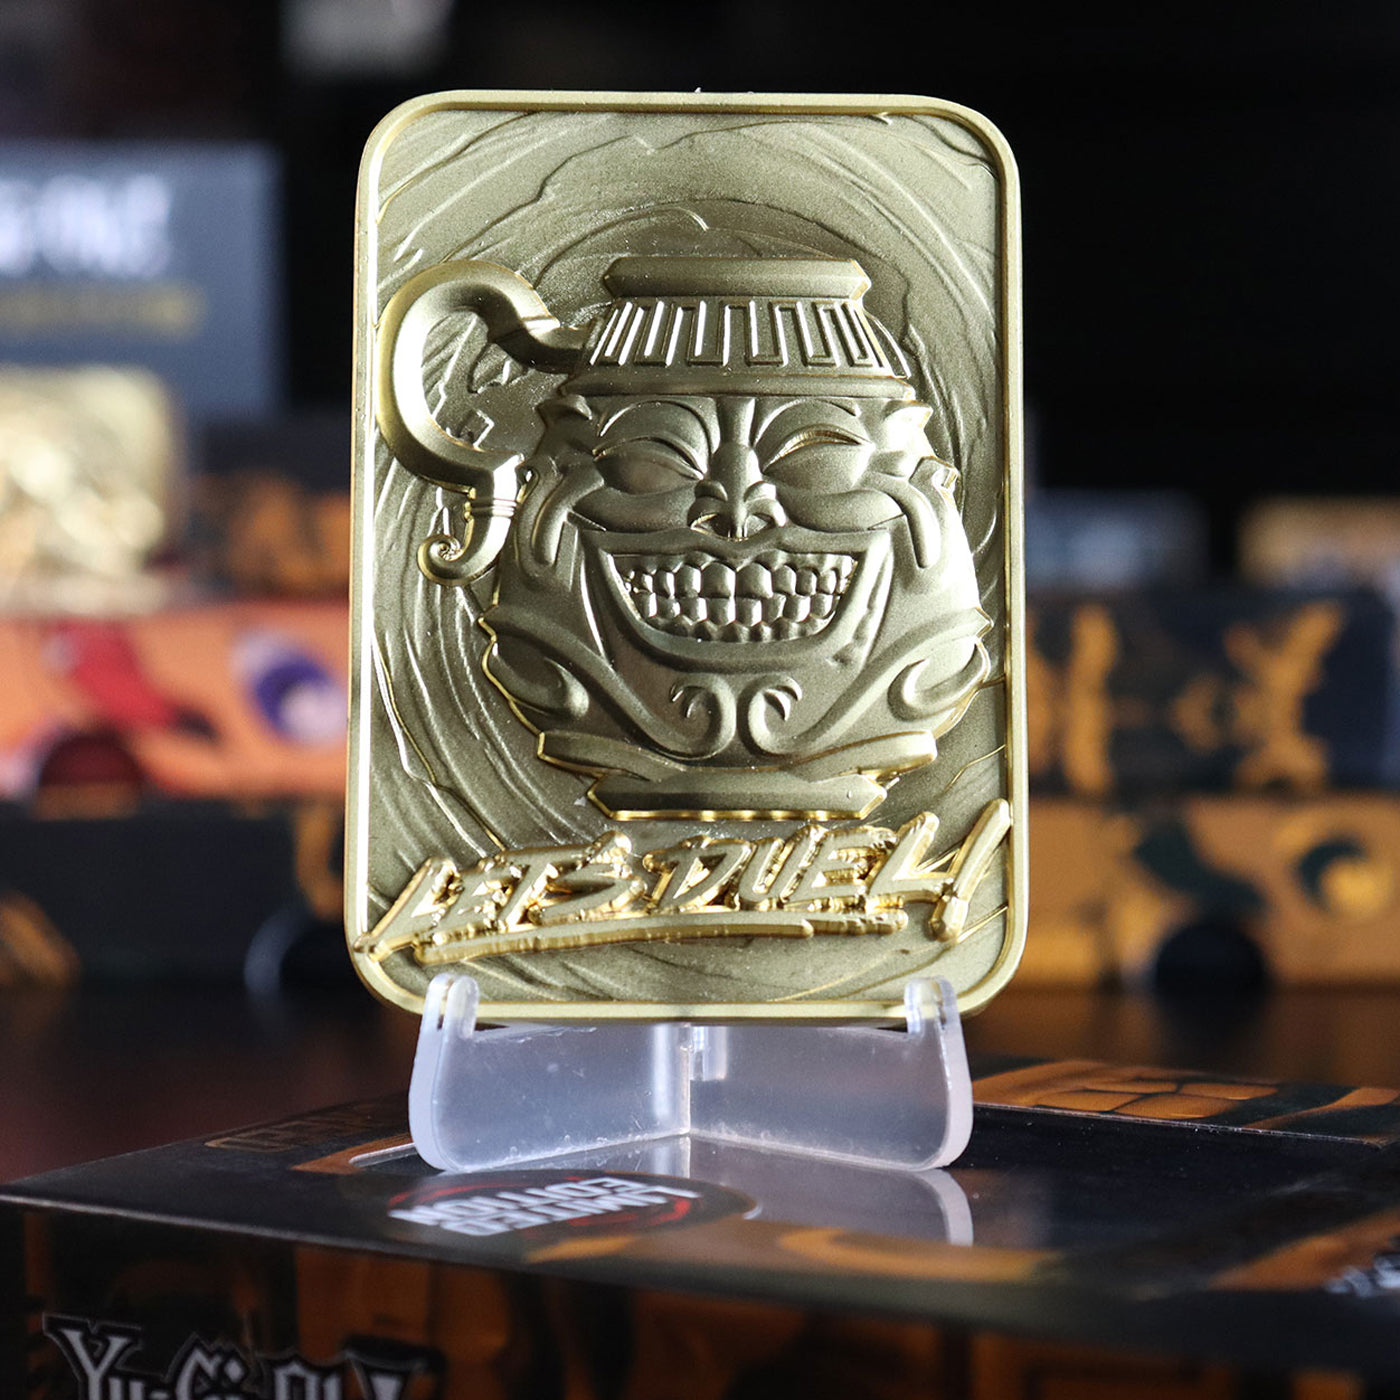 Yu-Gi-Oh! Limited Edition 24k Gold Plated Pot of Greed Metal Card